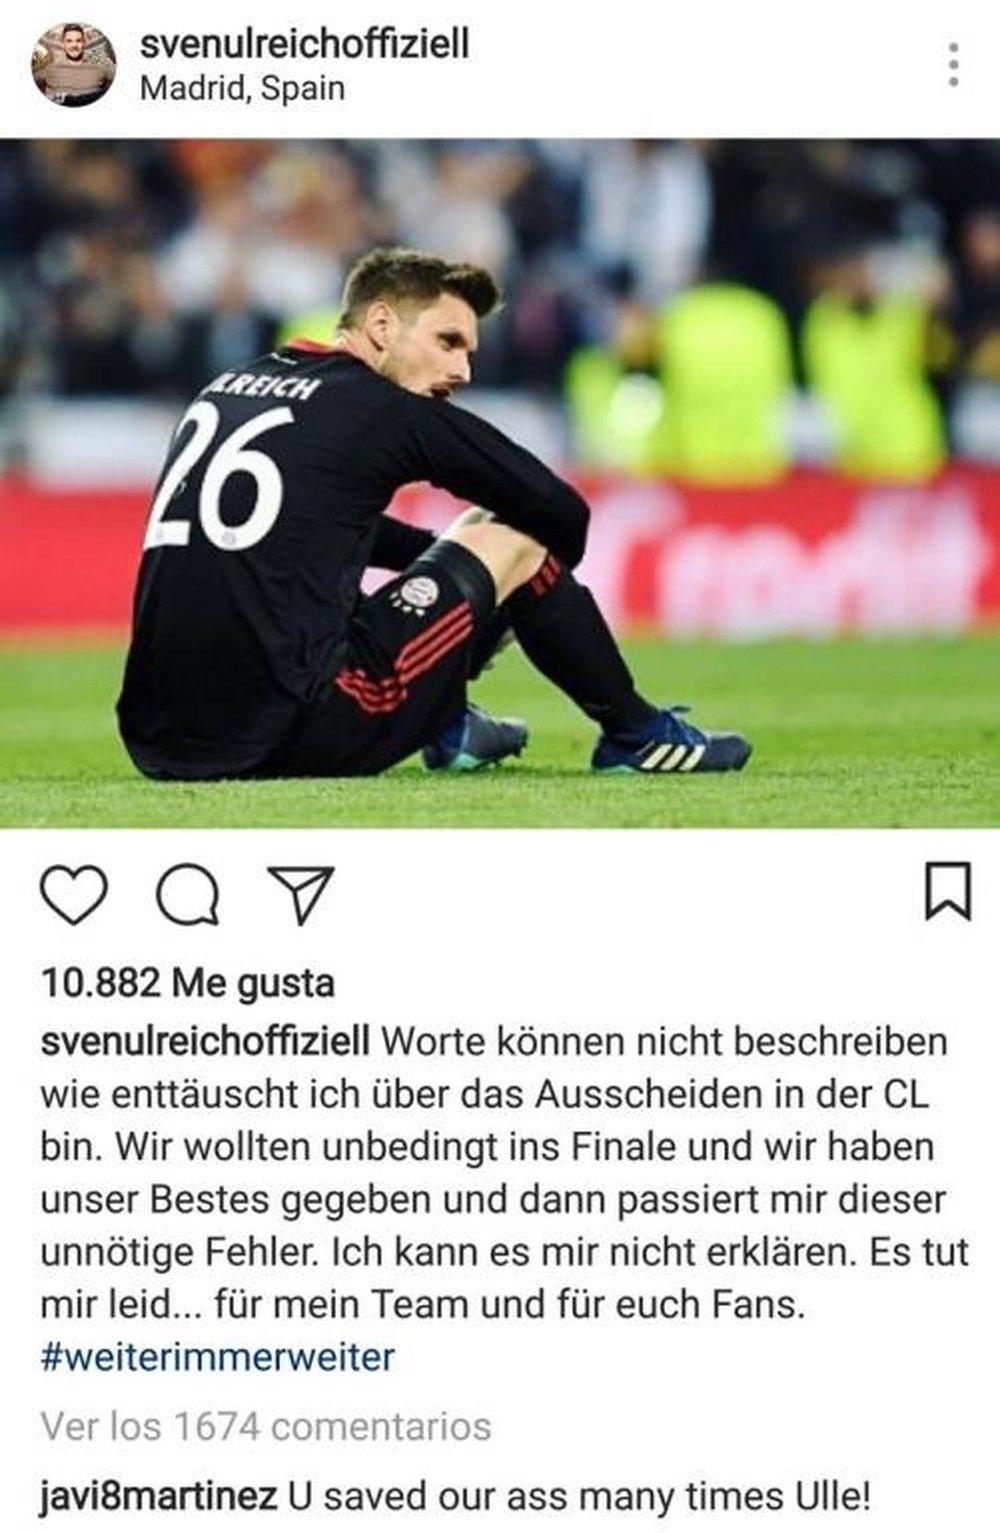 Ulreich asked for forgiveness on his social media. Instagram/Ulreich